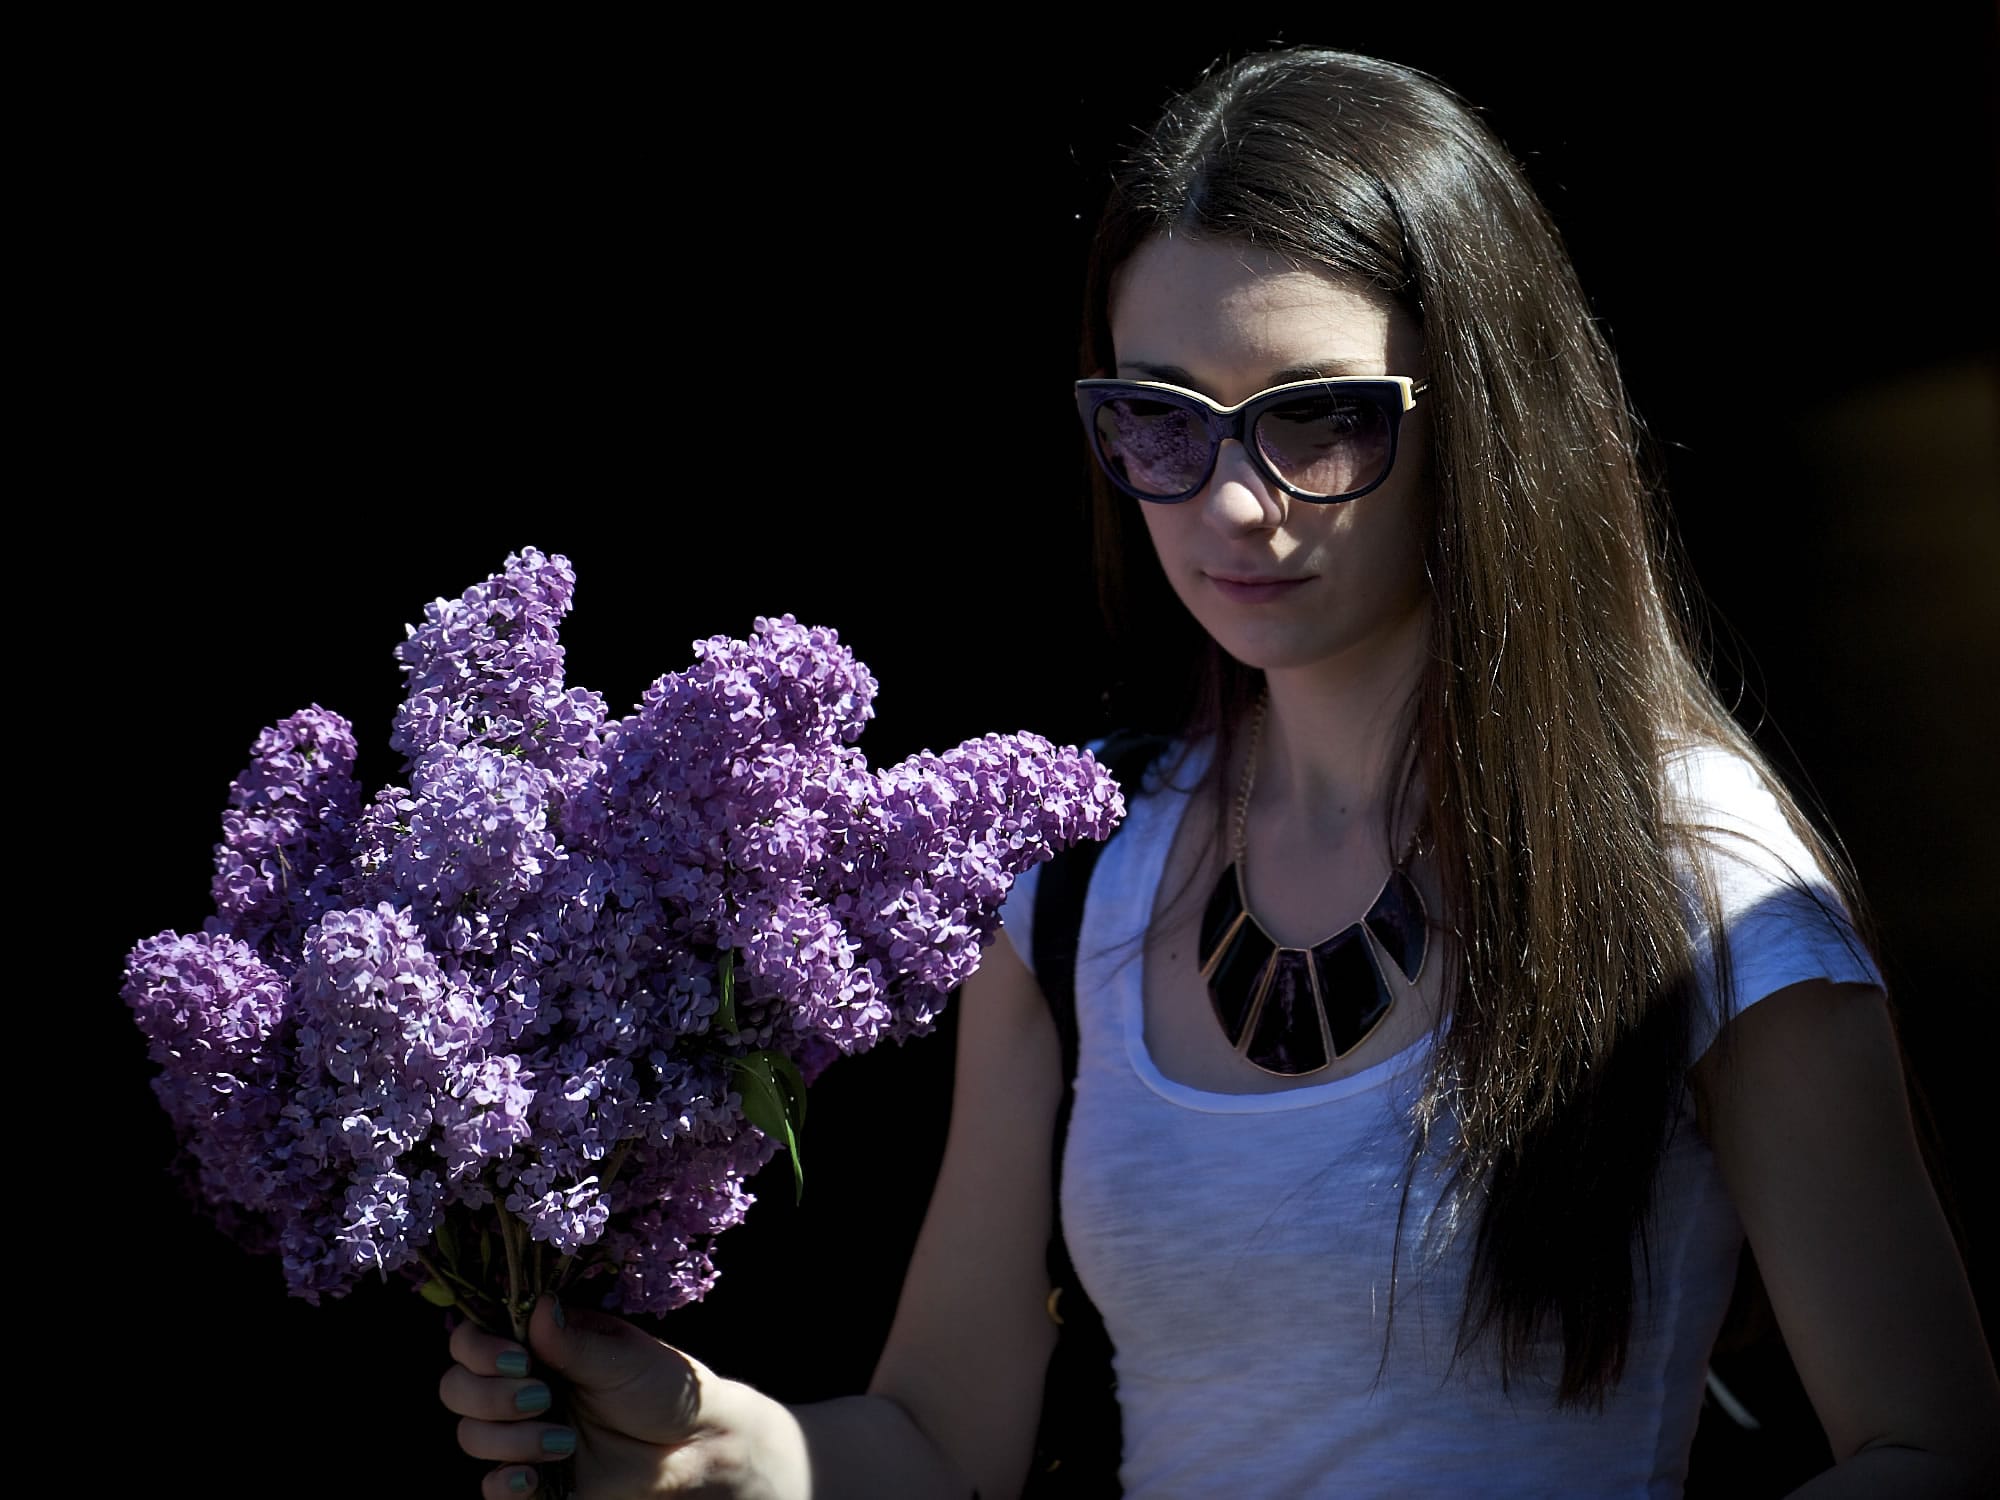 Anastasia Colesnic, 21, of Vancouver carries a lilac  bouquet that she planned on sharing with a friend during Lilac Days at the Hulda Klager Lilac Gardens in Woodland on Sunday.